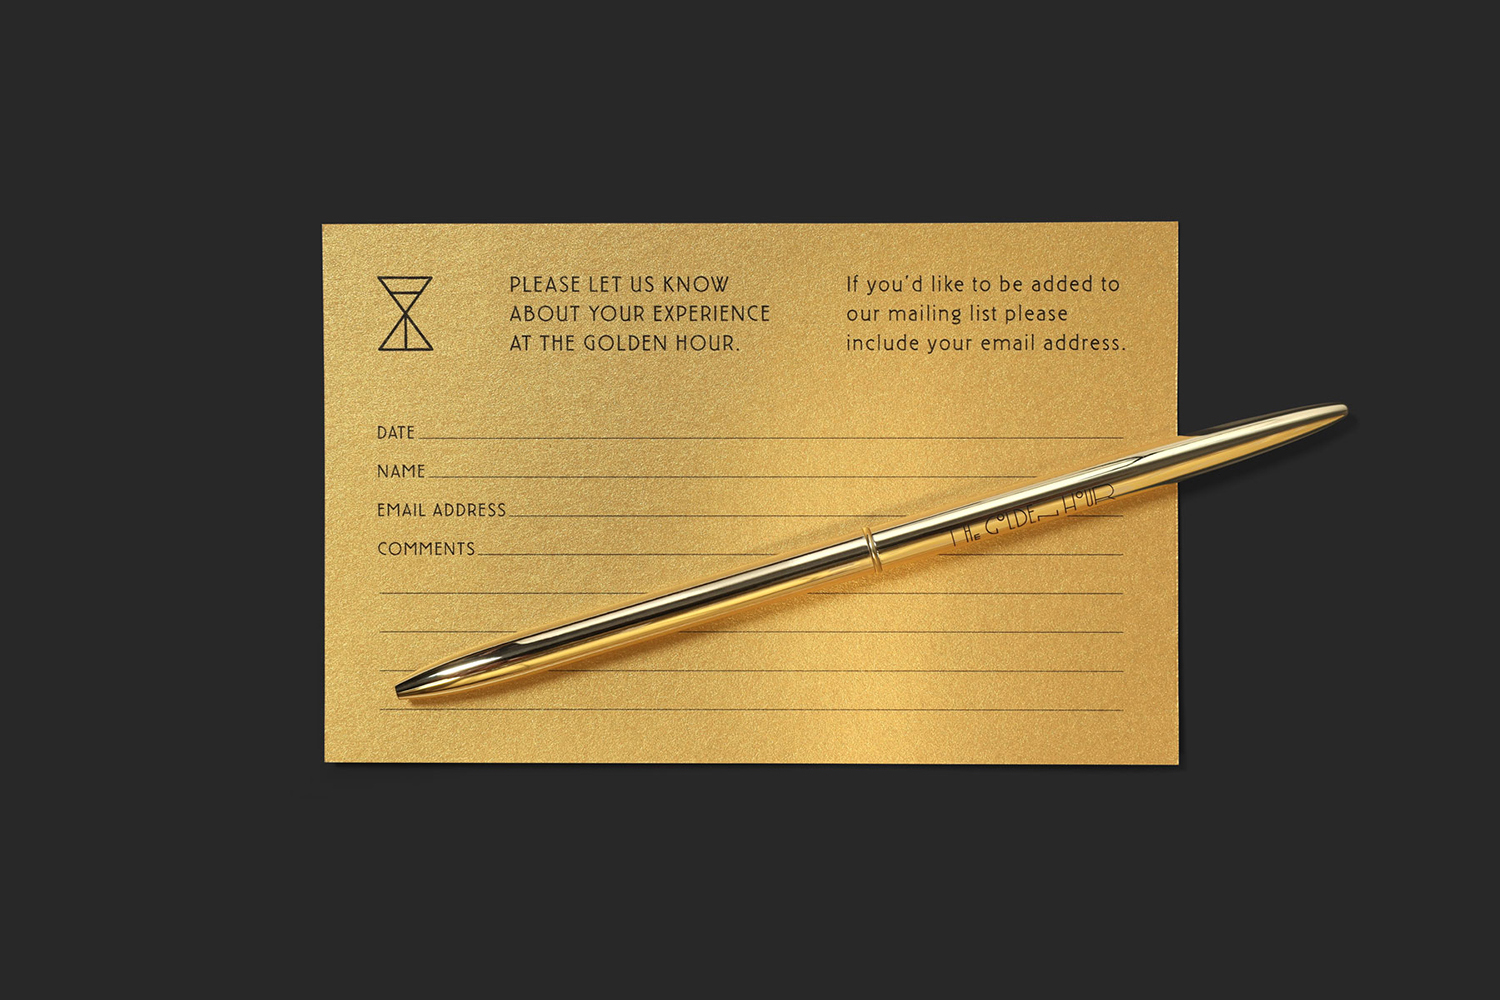 New Graphic Identity and notecard design for New York restaurant The Golden Hour by Triboro